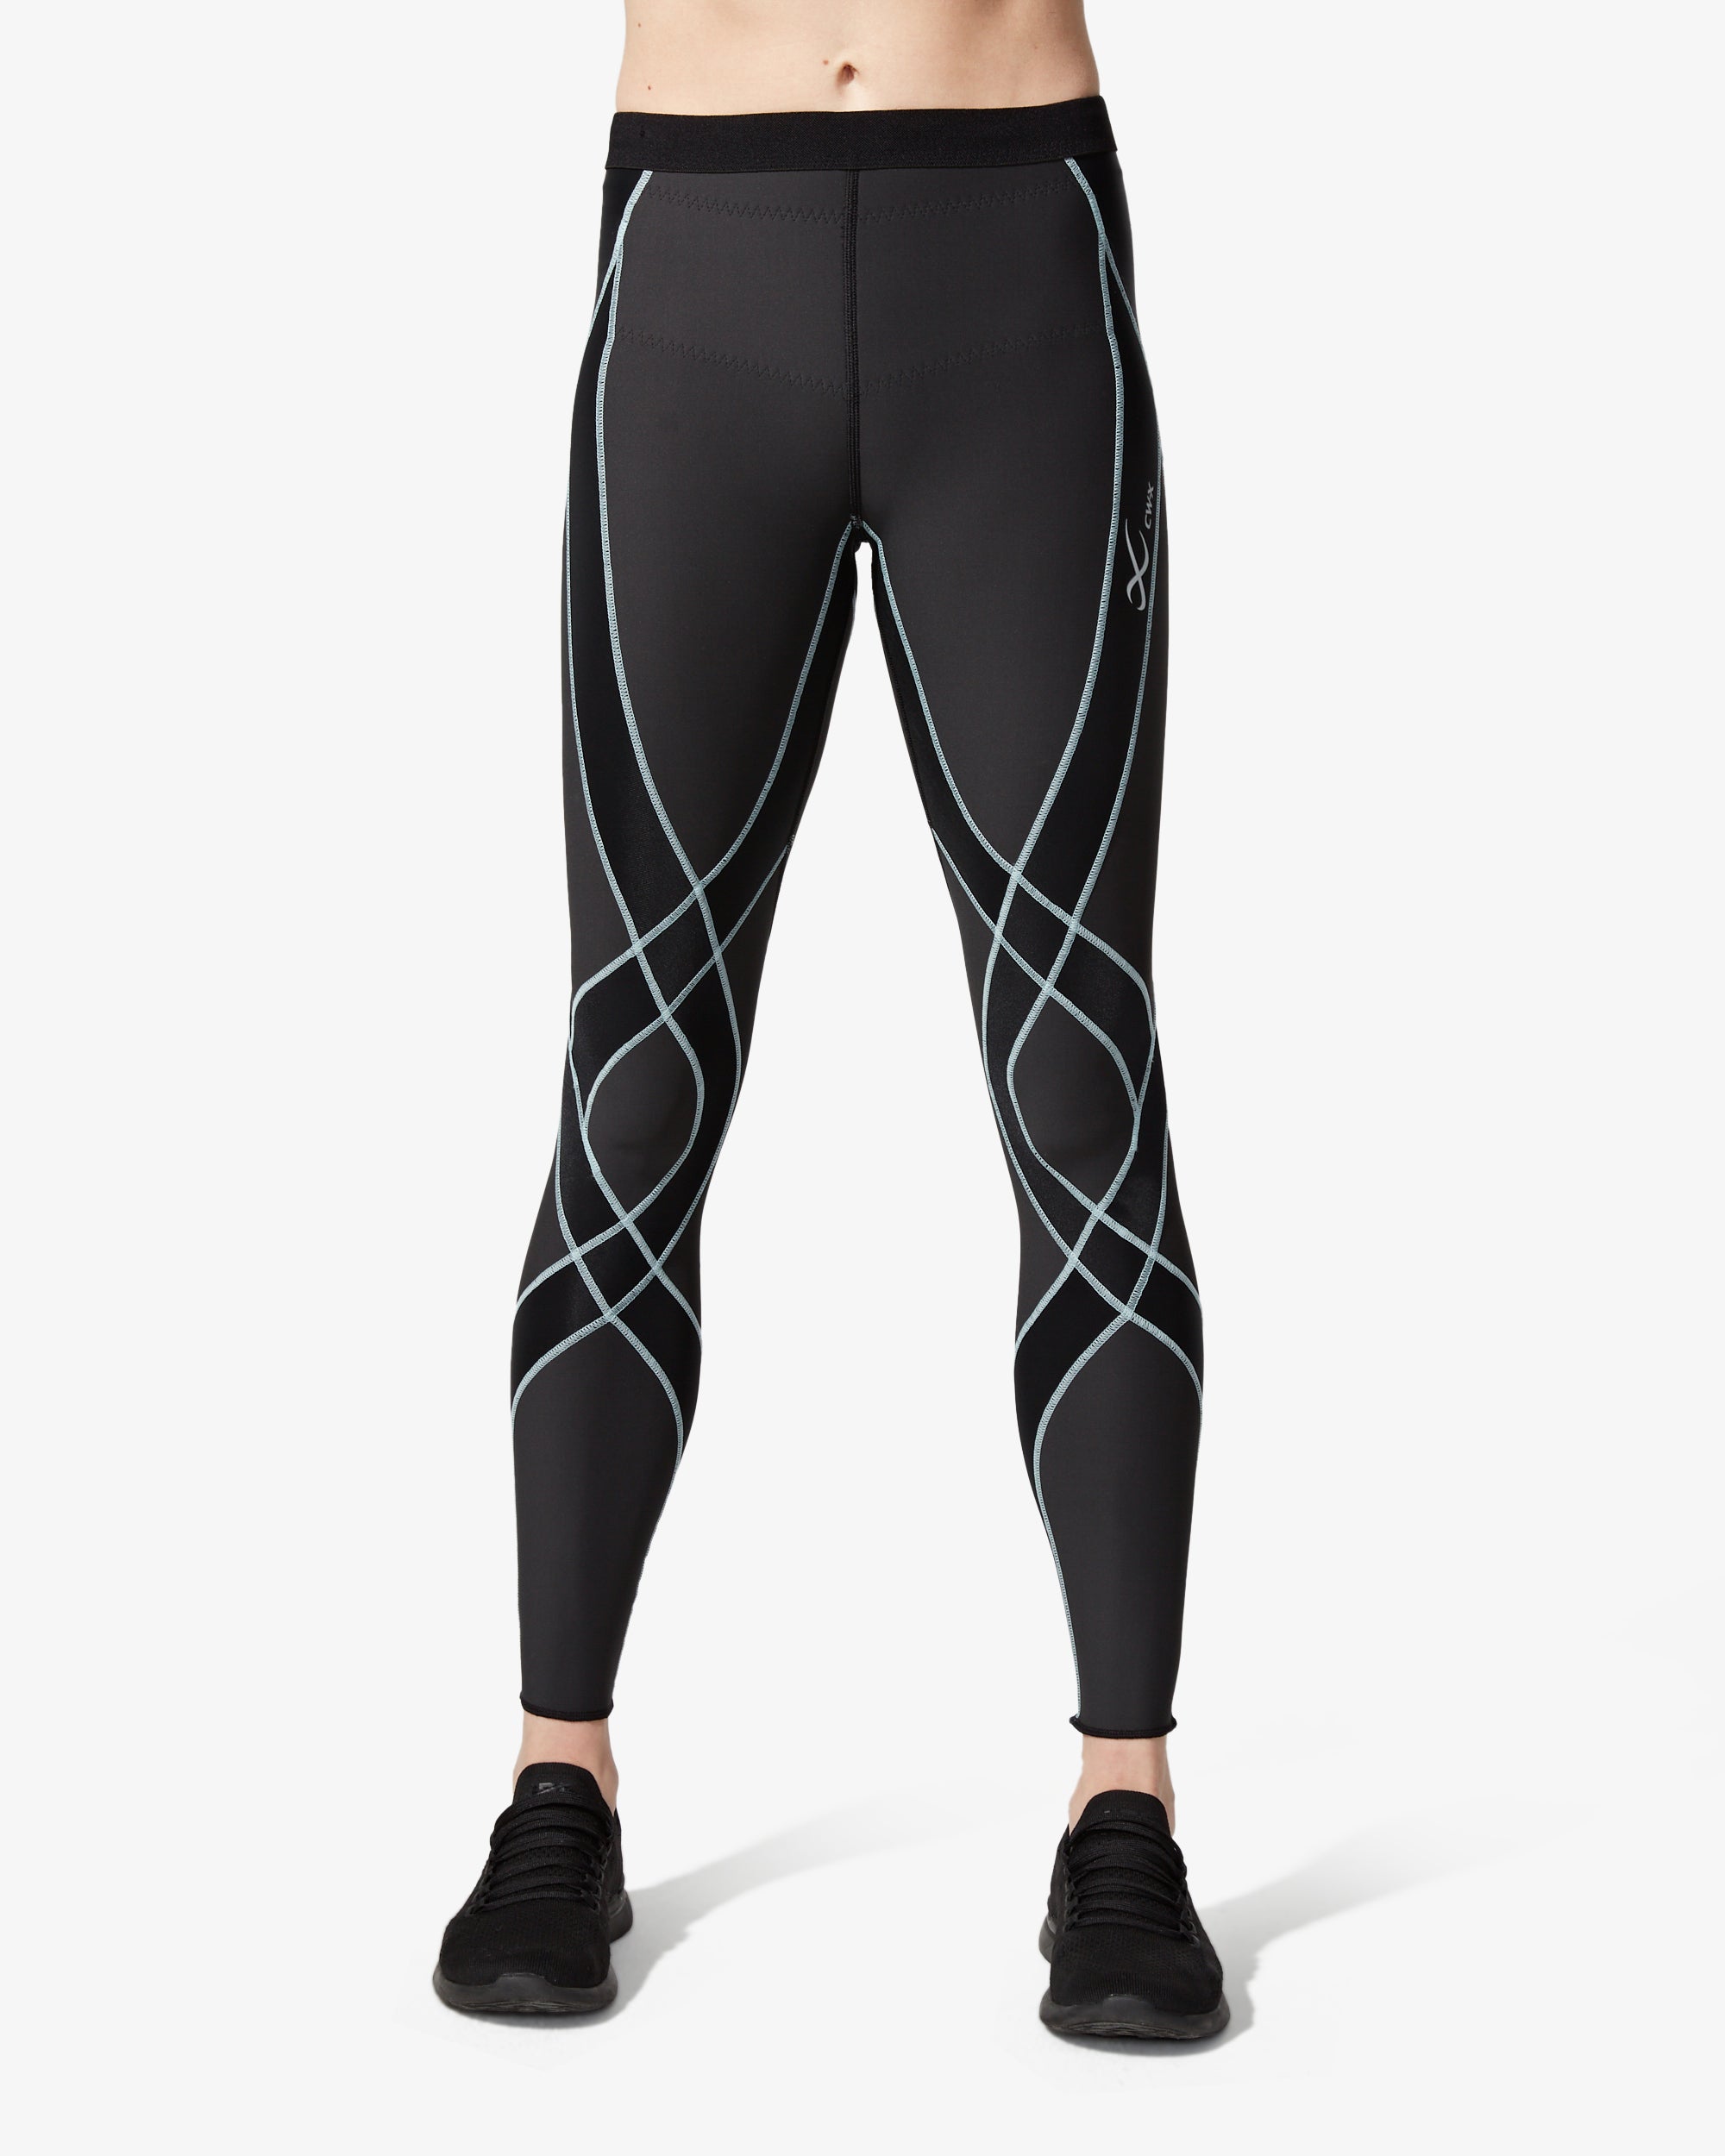 Stay supported and stylish in CW-X Conditioning Wear Women's